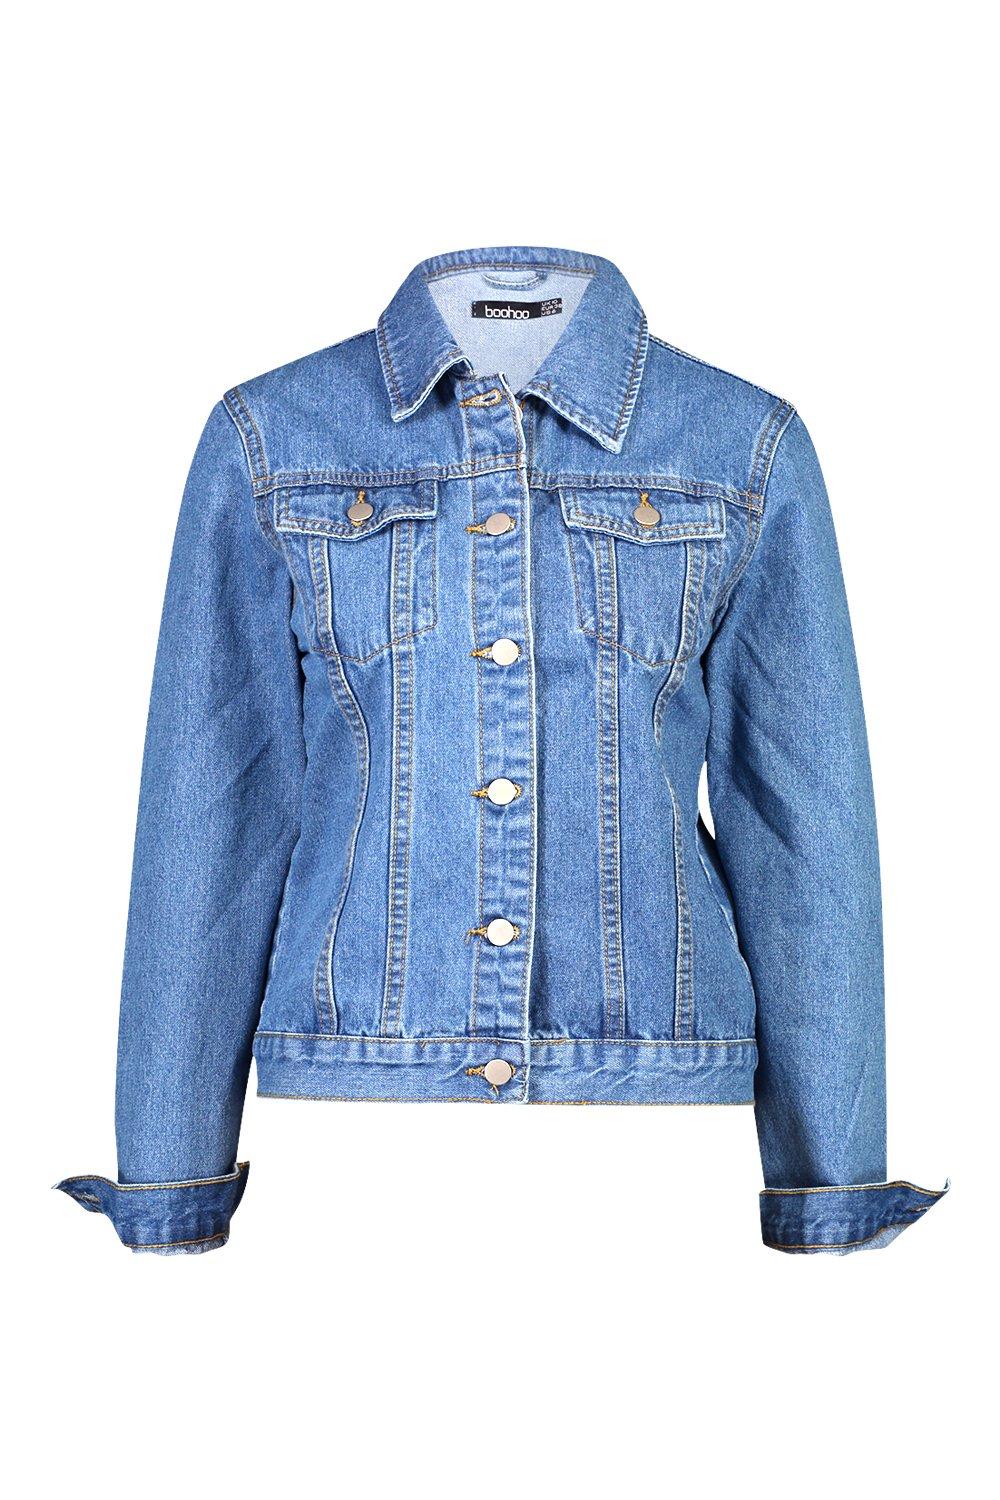 Blue Jean Denim Jackets Women Cotton Fitted Denim Racer Jackets With Pocket  Designs In Autumn Winter 2019 From Tinaguo977, $23.48